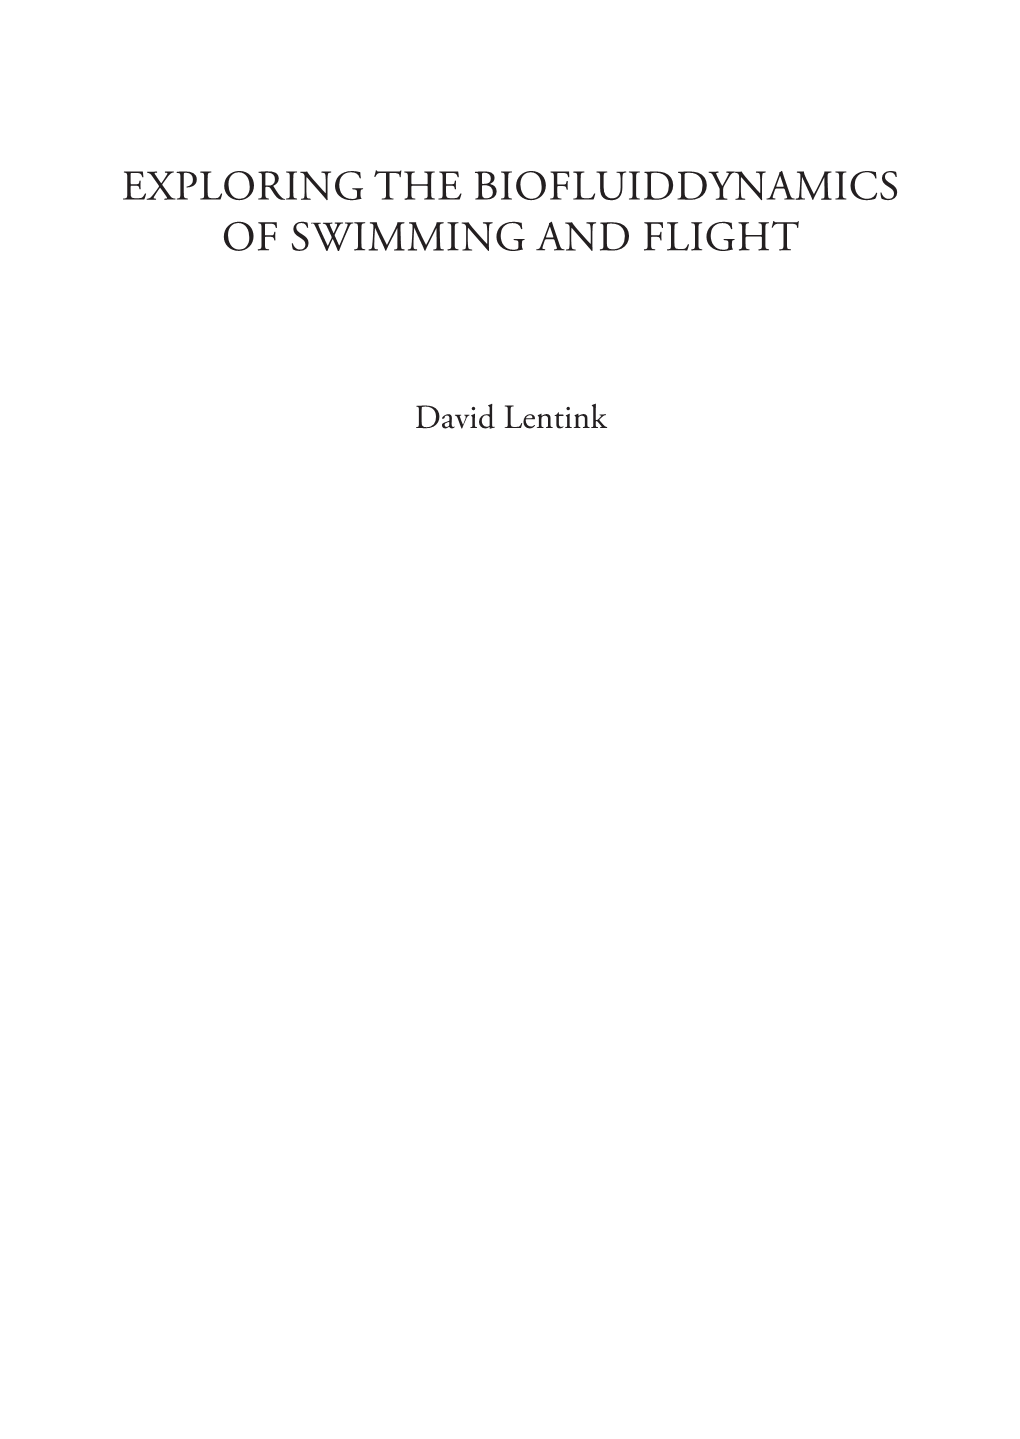 Exploring the Biofluiddynamics of Swimming and Flight